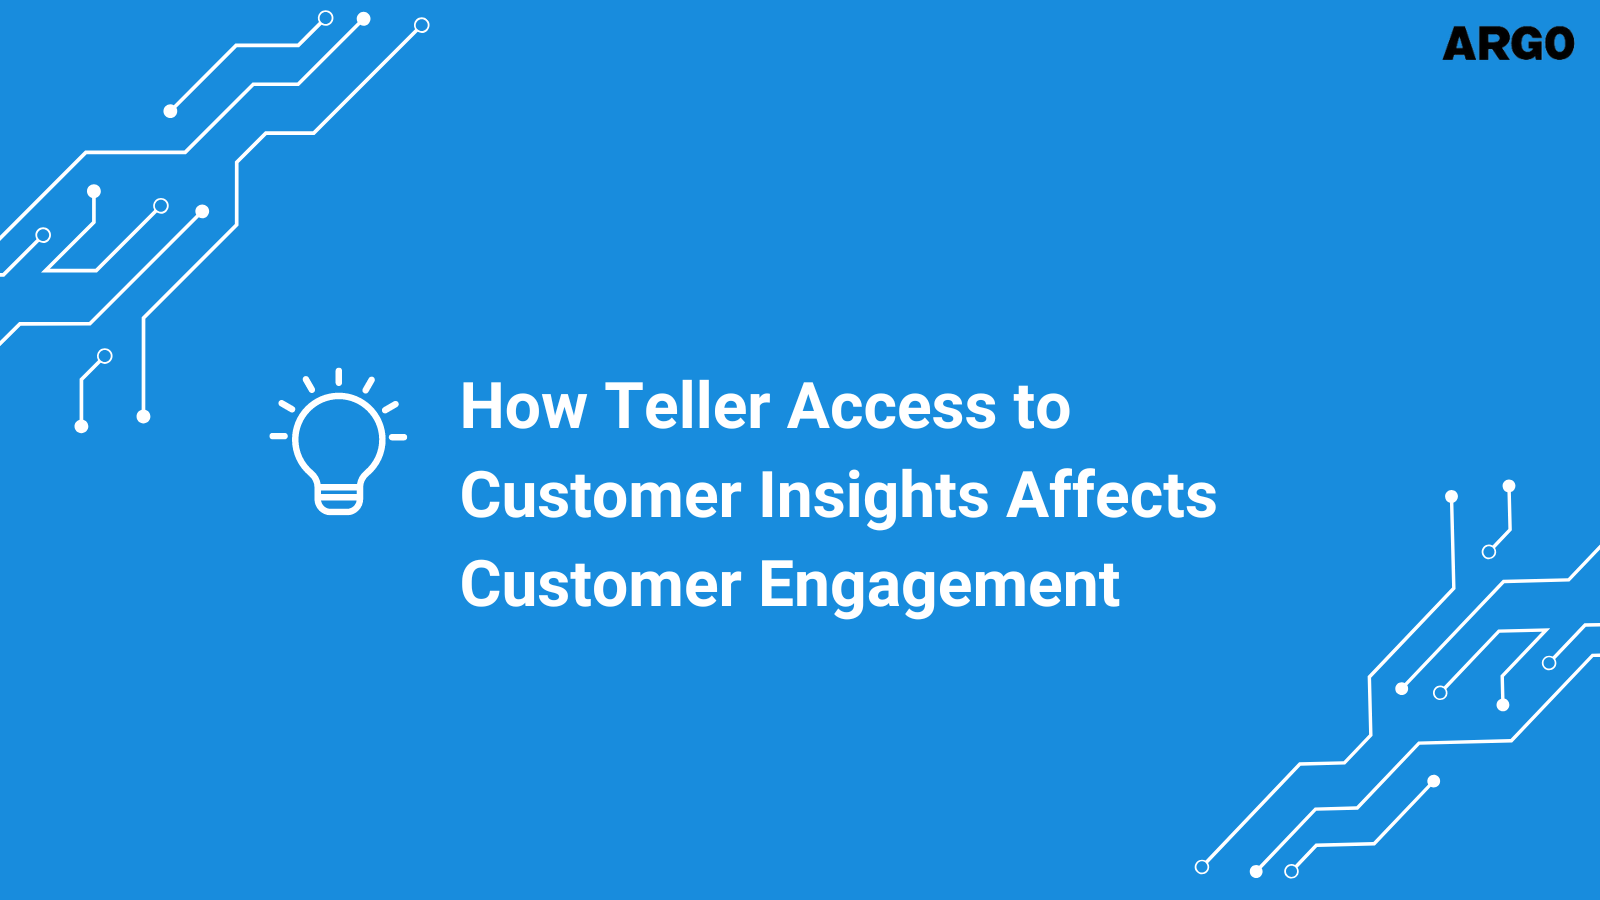 How Teller Access to Customer Insights Affects Customer Engagement